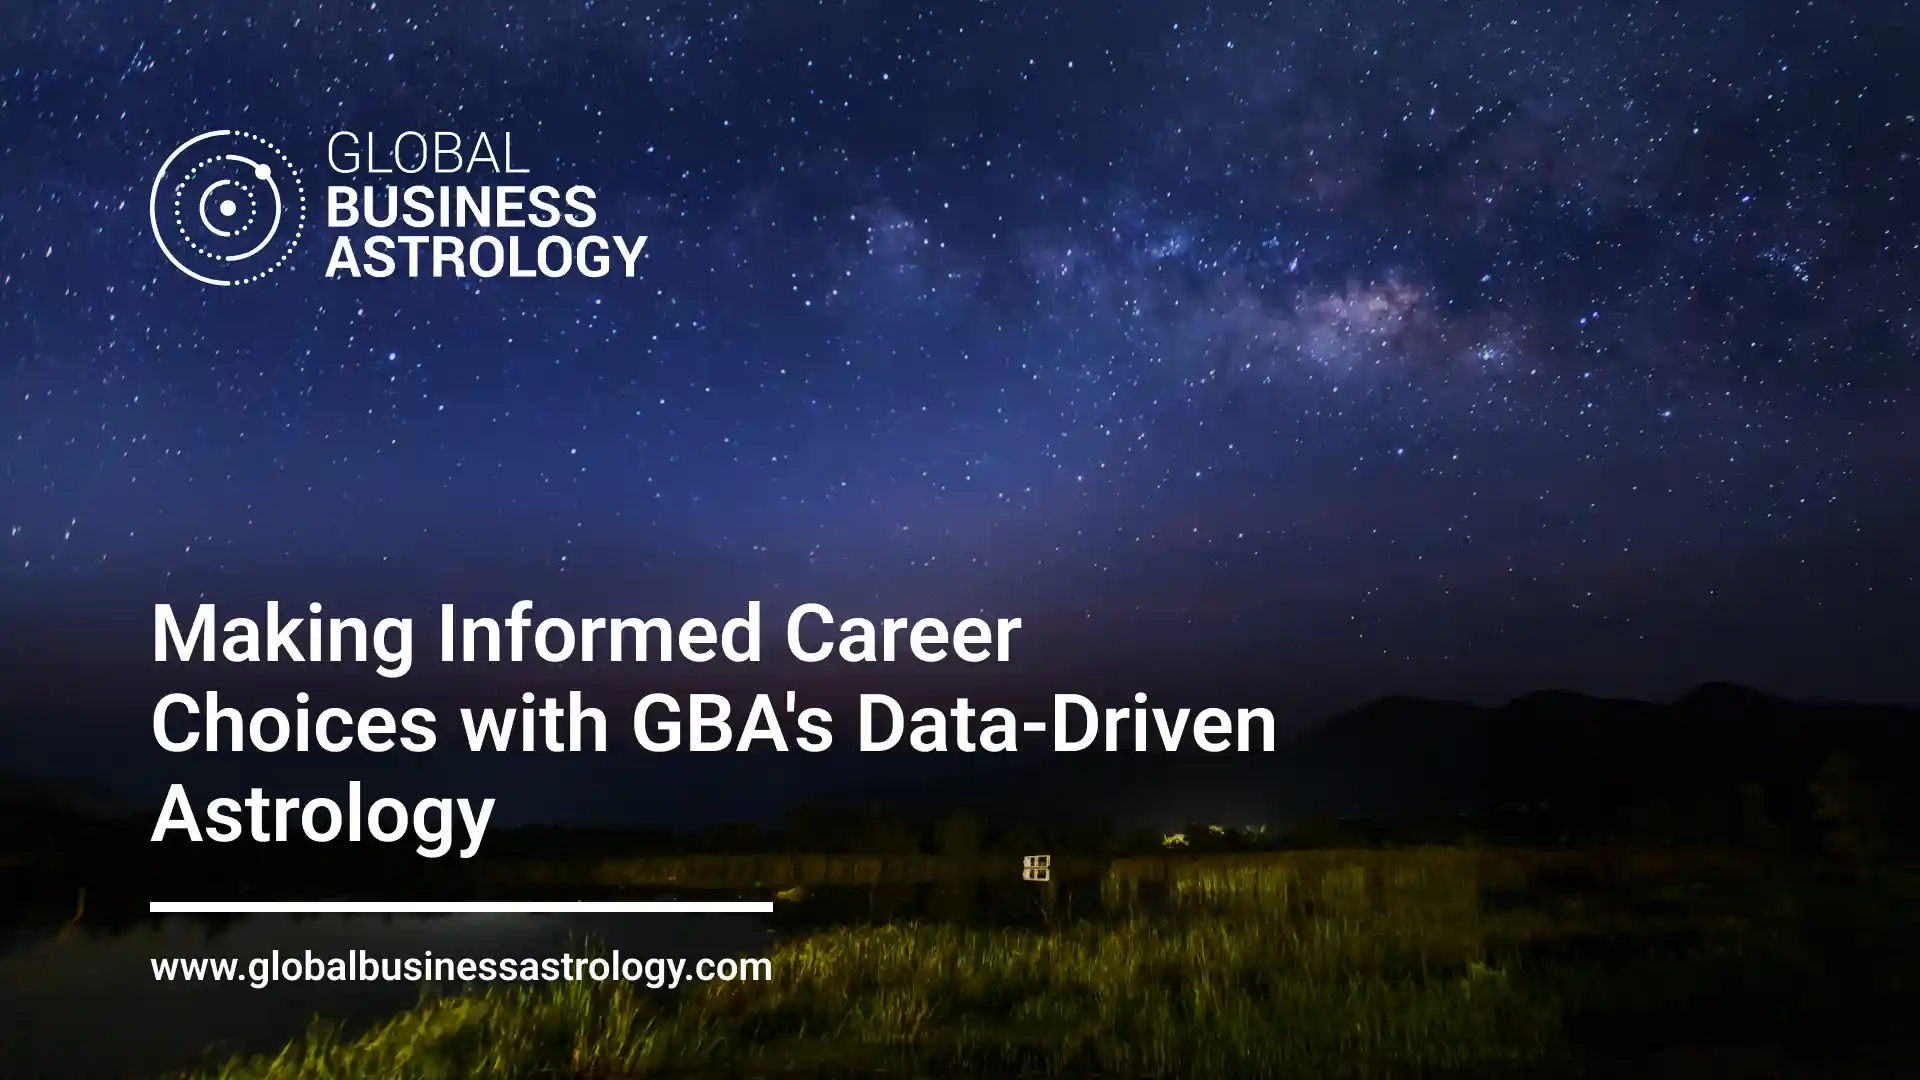 Making Informed Career Choices with GBA's Data-Driven Astrology